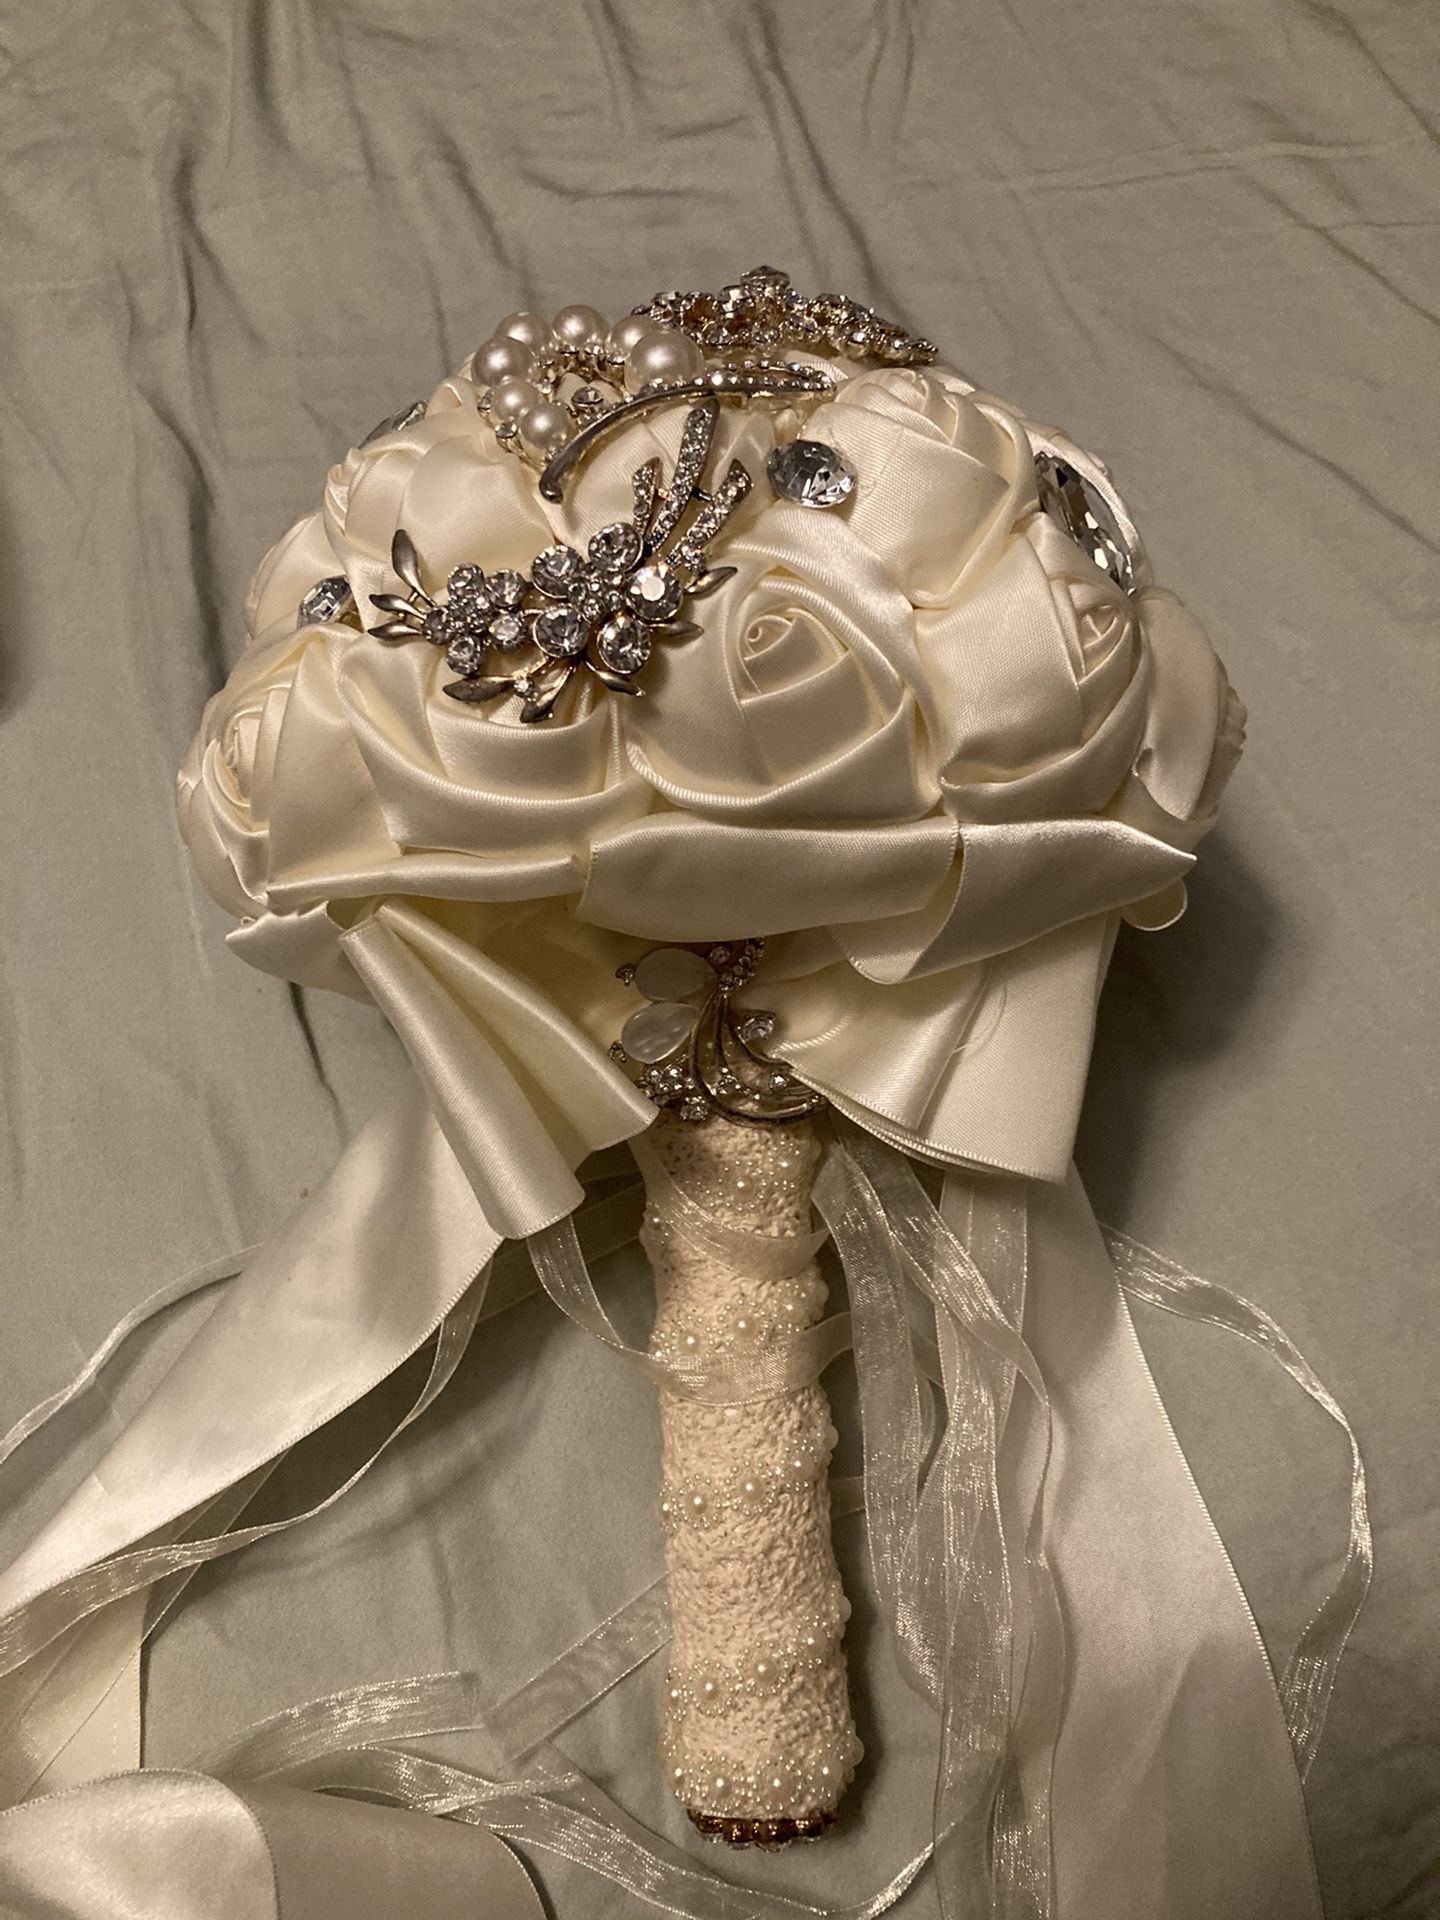 Bridal Bouquet With Satin Flowers And Broaches